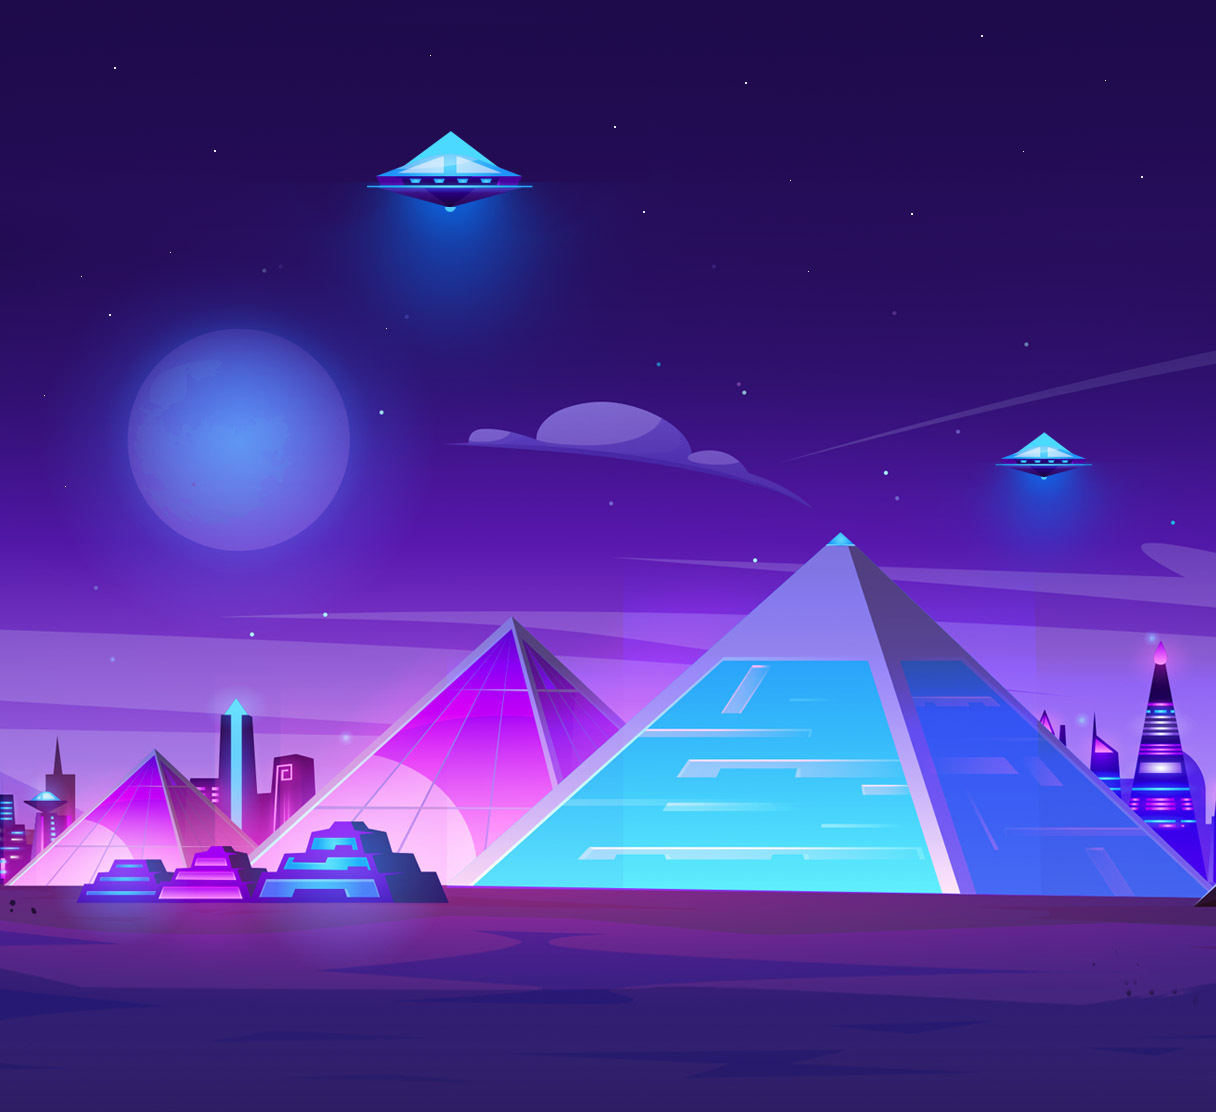 Pyramids with UFOs floating above them